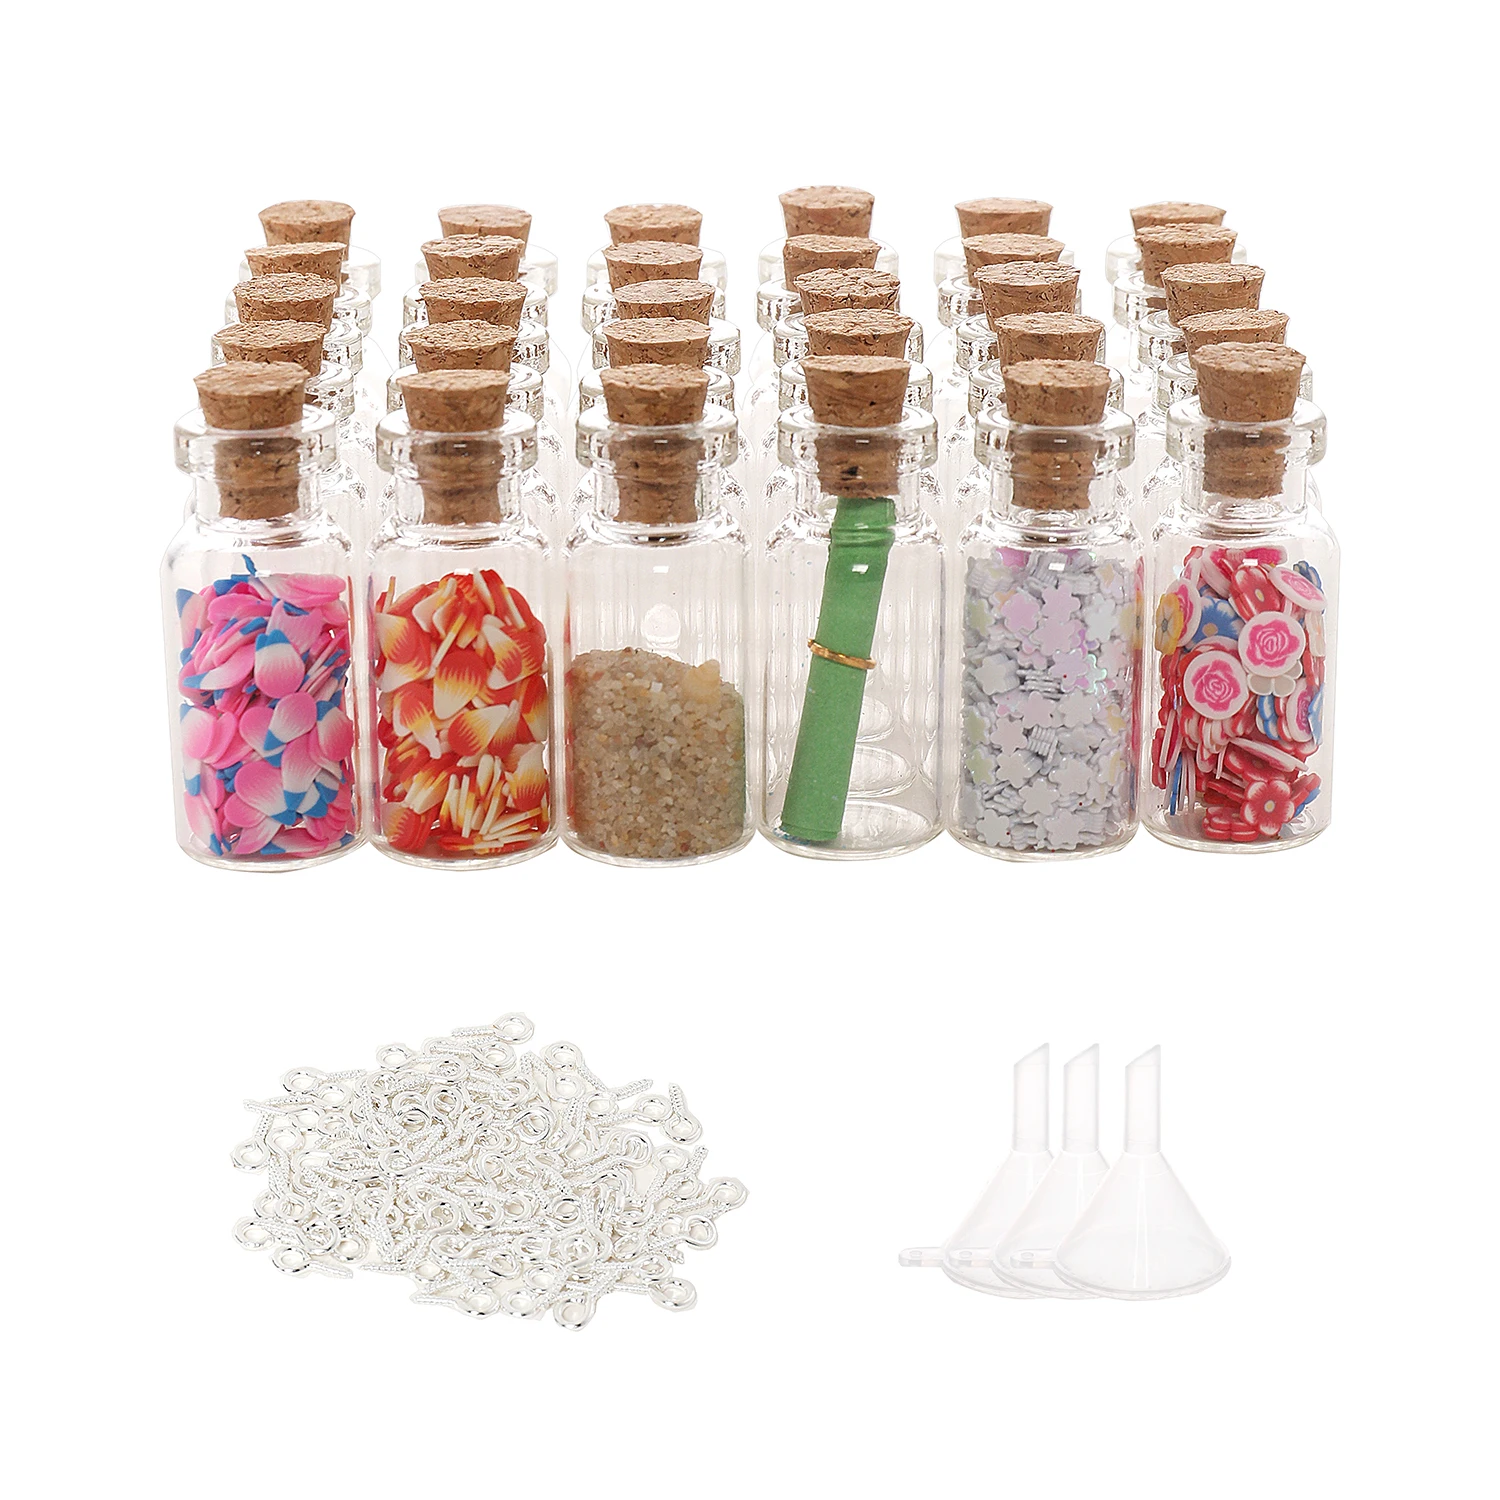 

60pcs Mini Glass Bottles with Cork 2ml Spell Jars Potion Vials Wish Message Container For Gift DIY Crafts